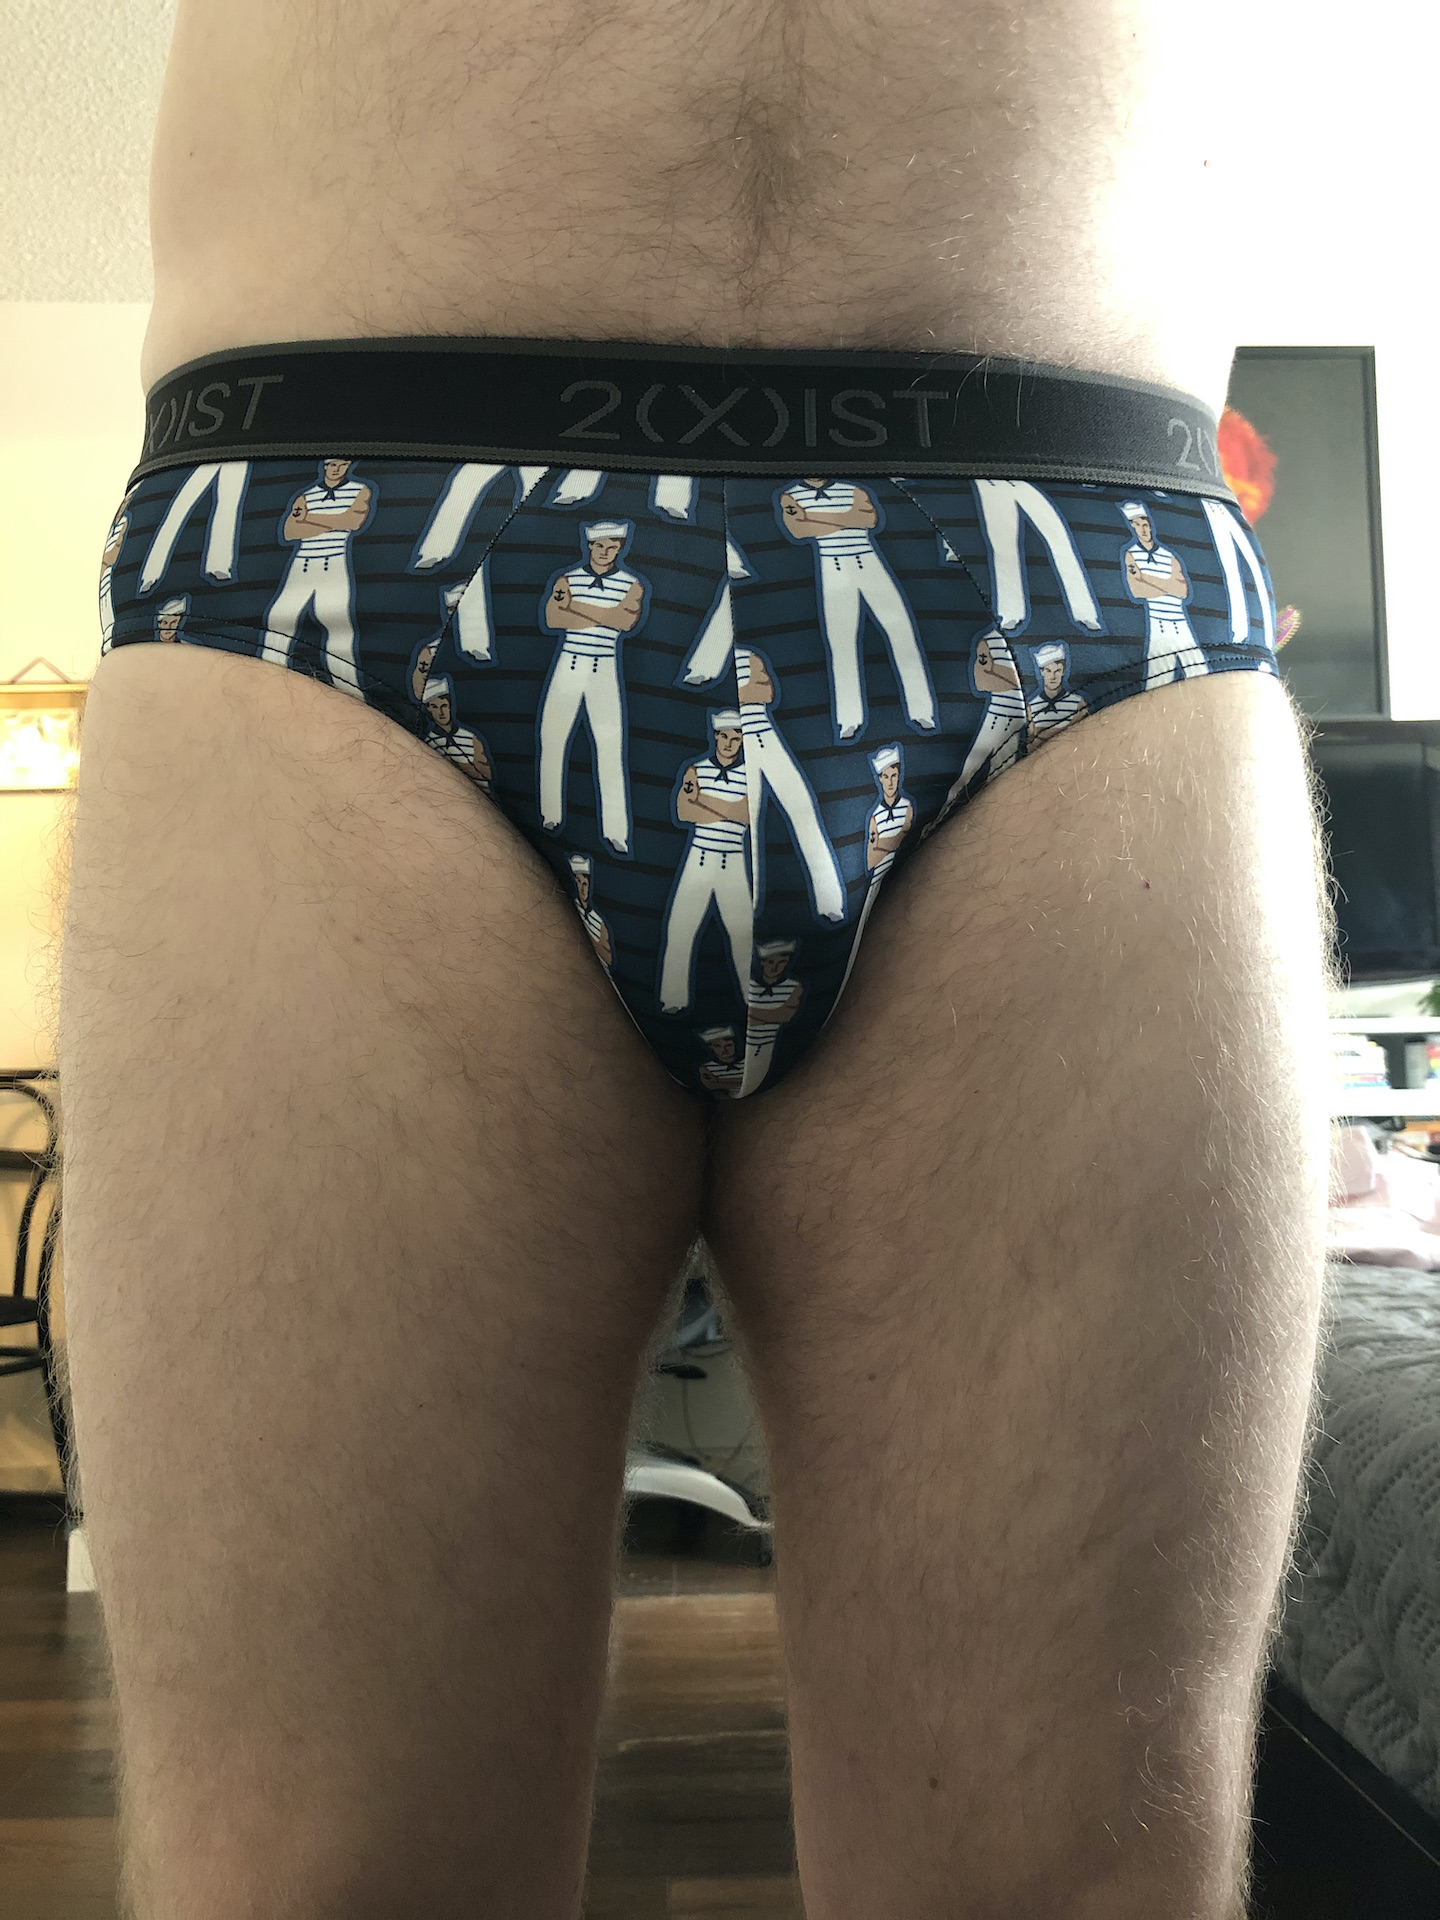 Ahoy Sailor! Feeling ship-shape in these briefs today…